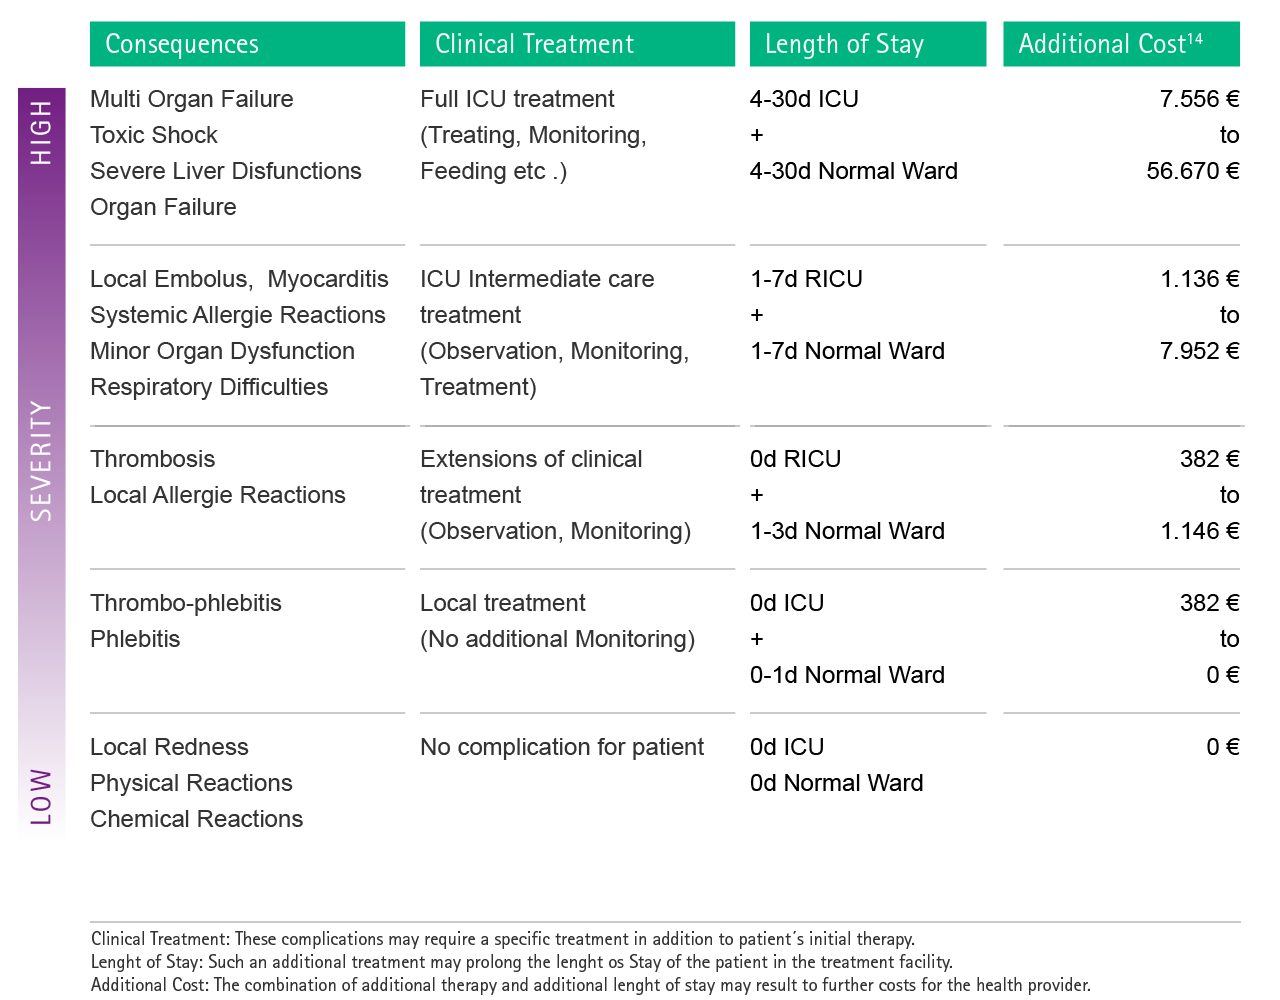 Table with estimations of possible additional costs as a consequence of selected example complications caused by drug incompatibility.